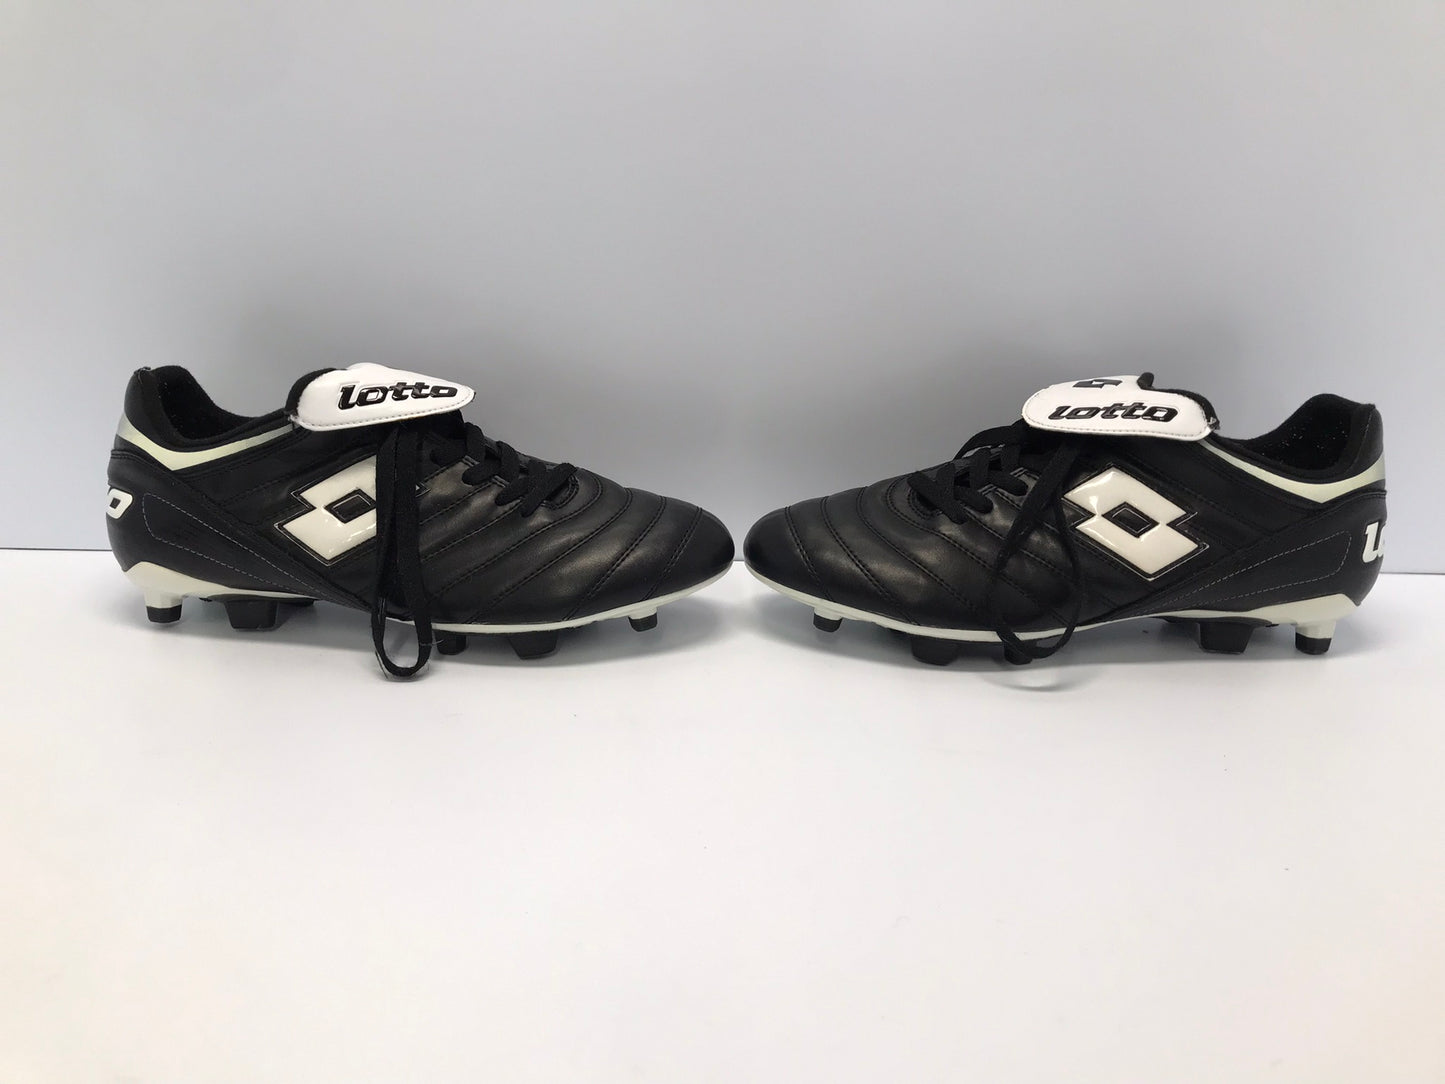 Soccer Shoes Cleats Men's Size 10.5 Lotto Black White Excellent As New